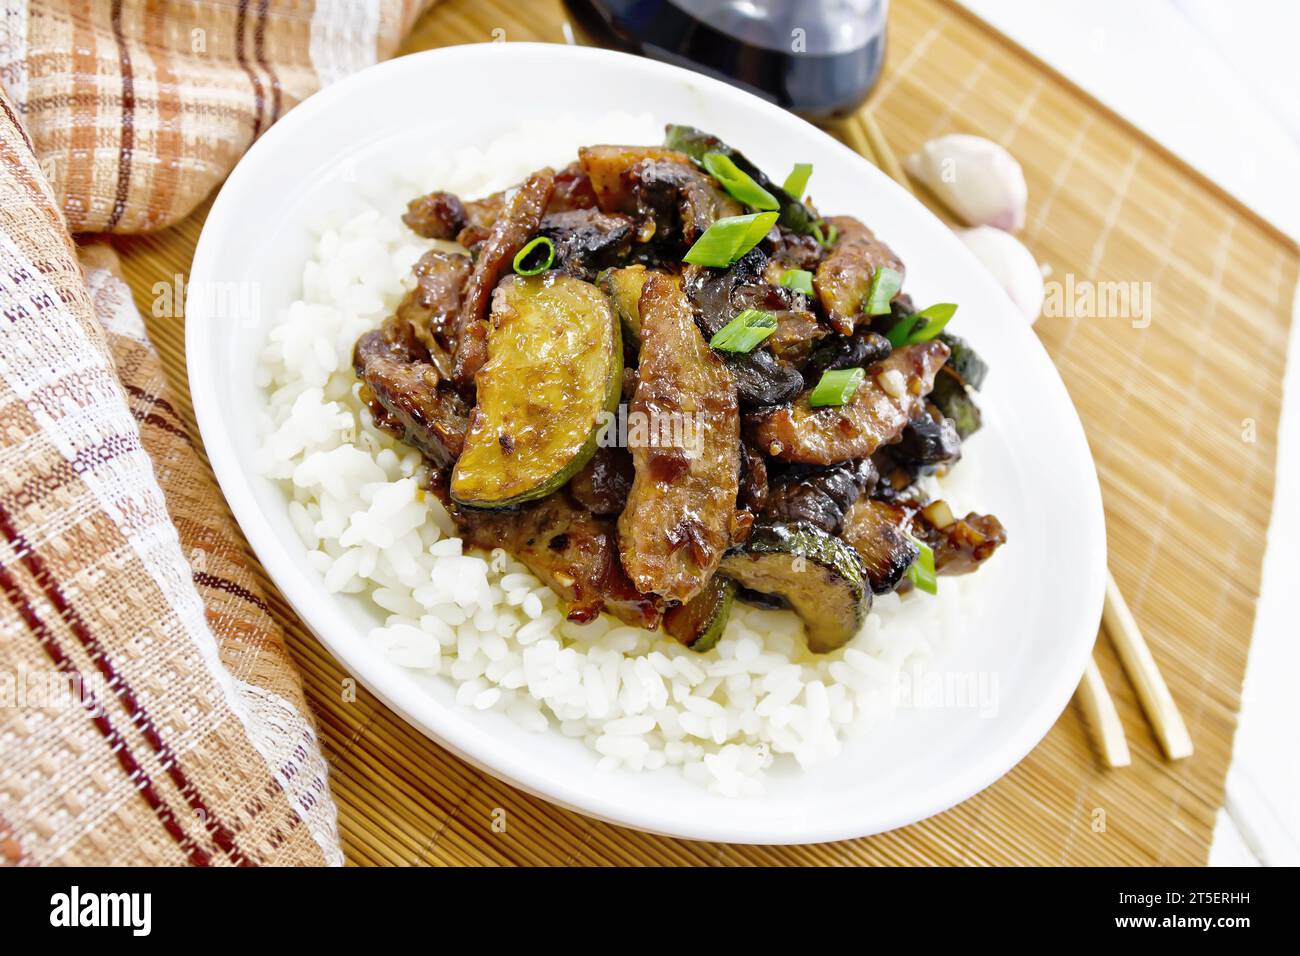 Chinese stir-fried dish of chicken meat with zucchini, mushrooms, soy sauce and rice garnish in a plate on bamboo napkin, a towel and garlic on light Stock Photo